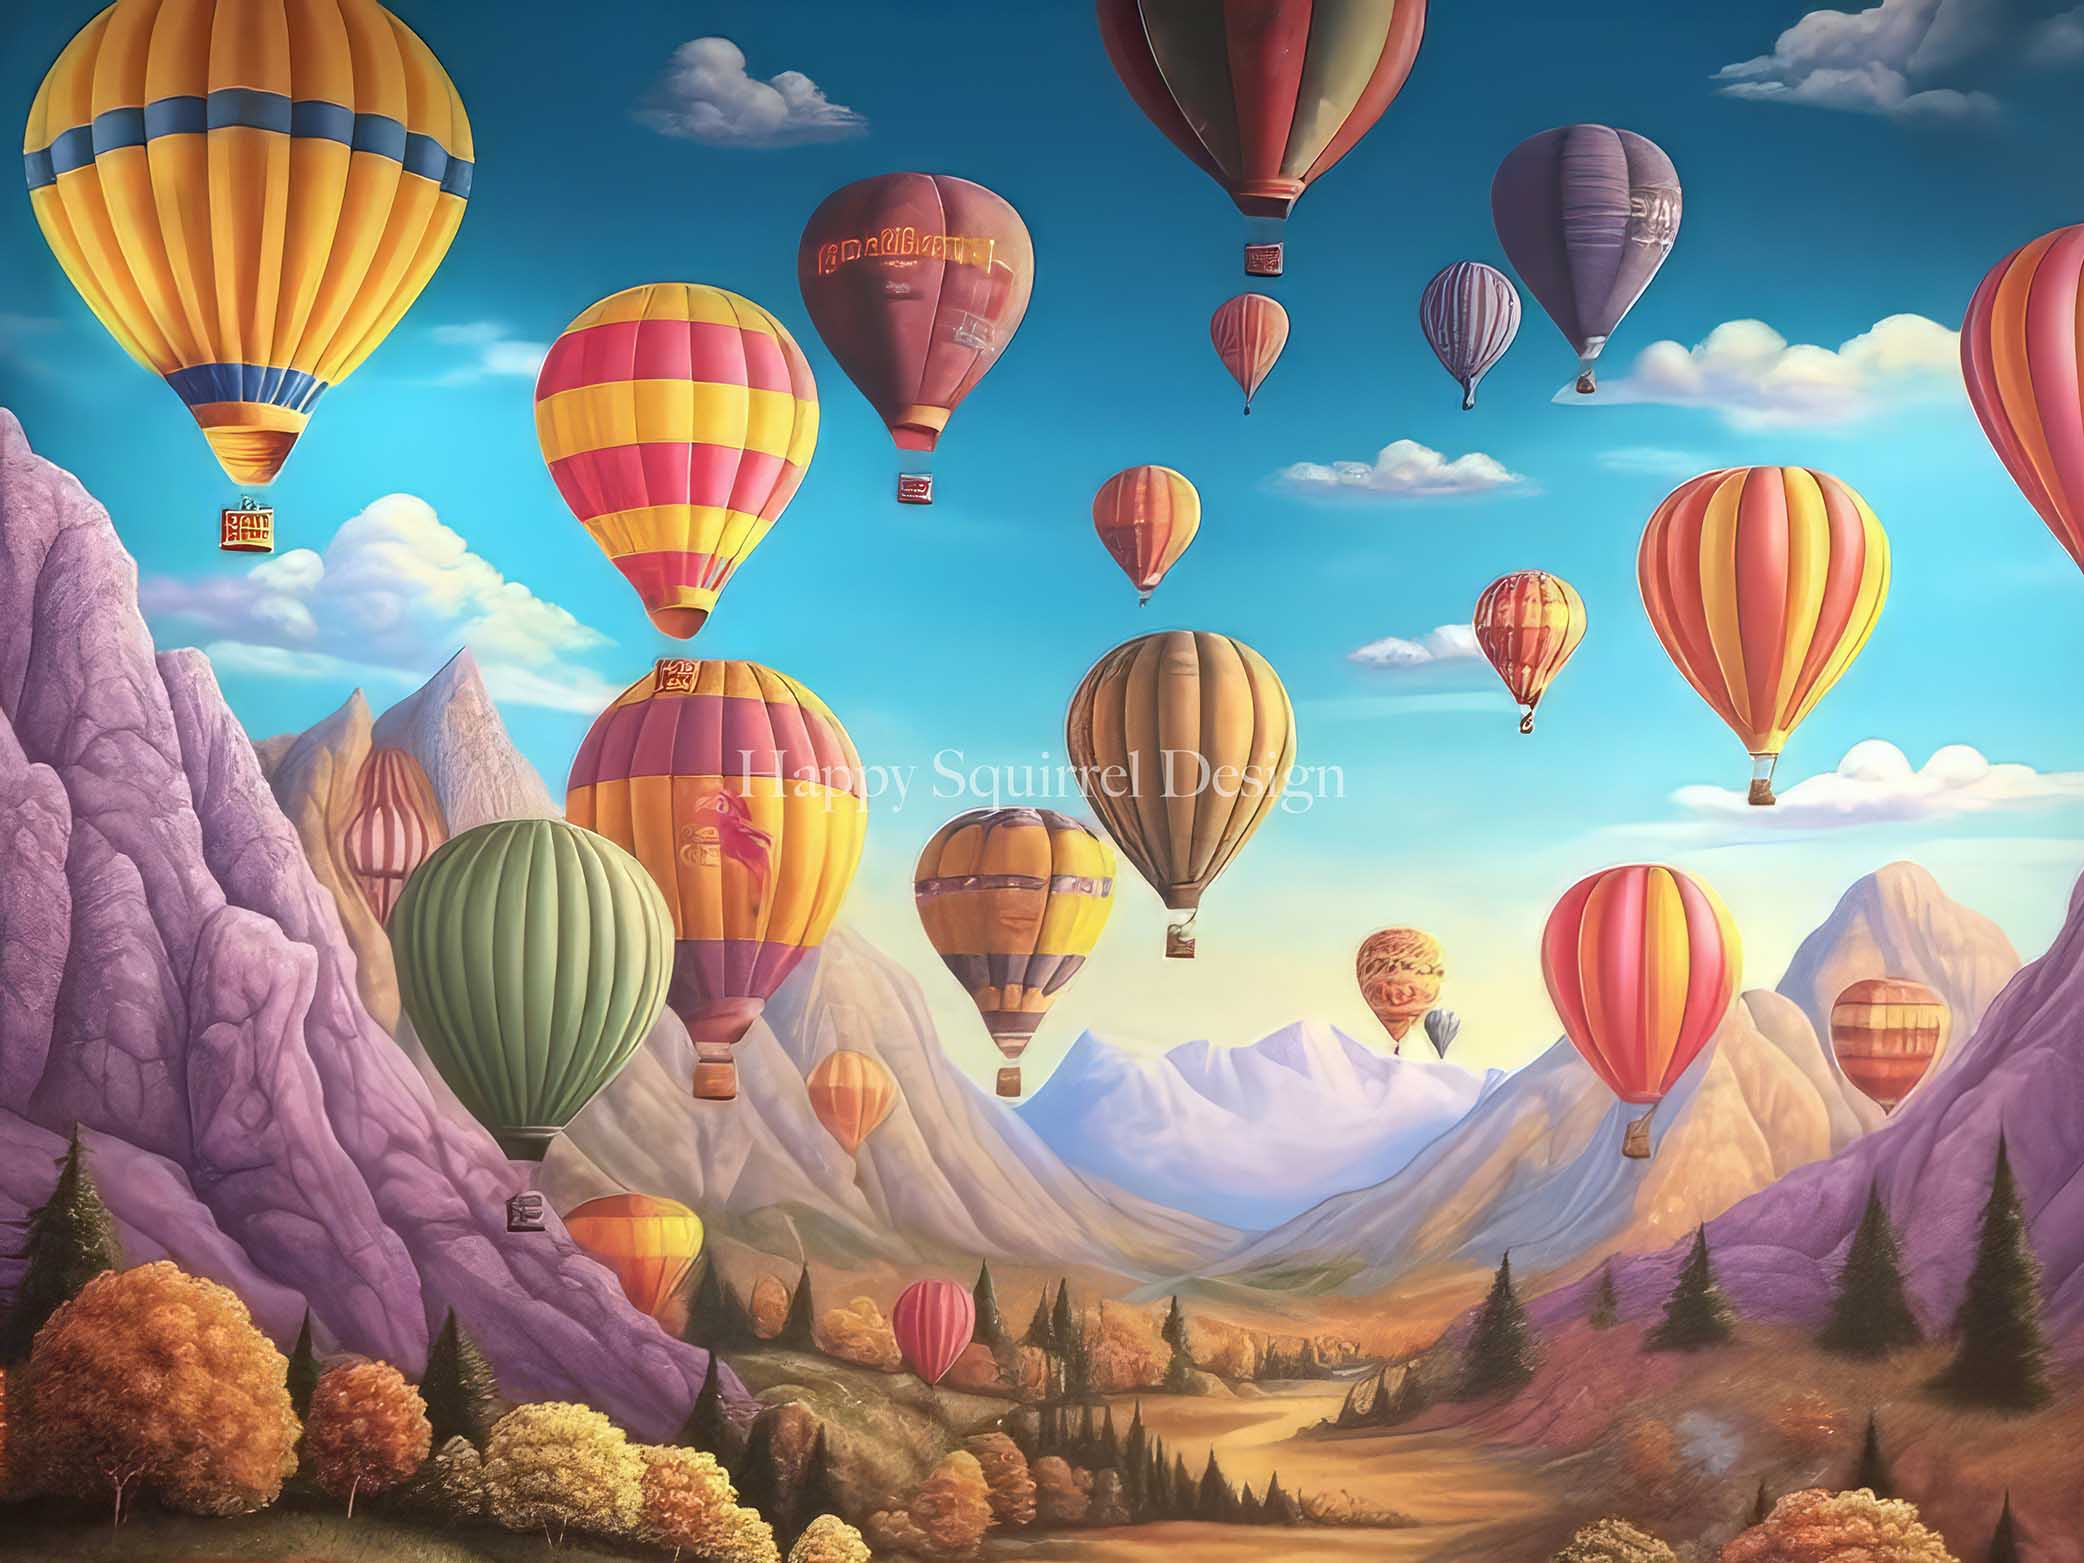 Kate Mountainside Air Balloons Backdrop Designed by Happy Squirrel Design